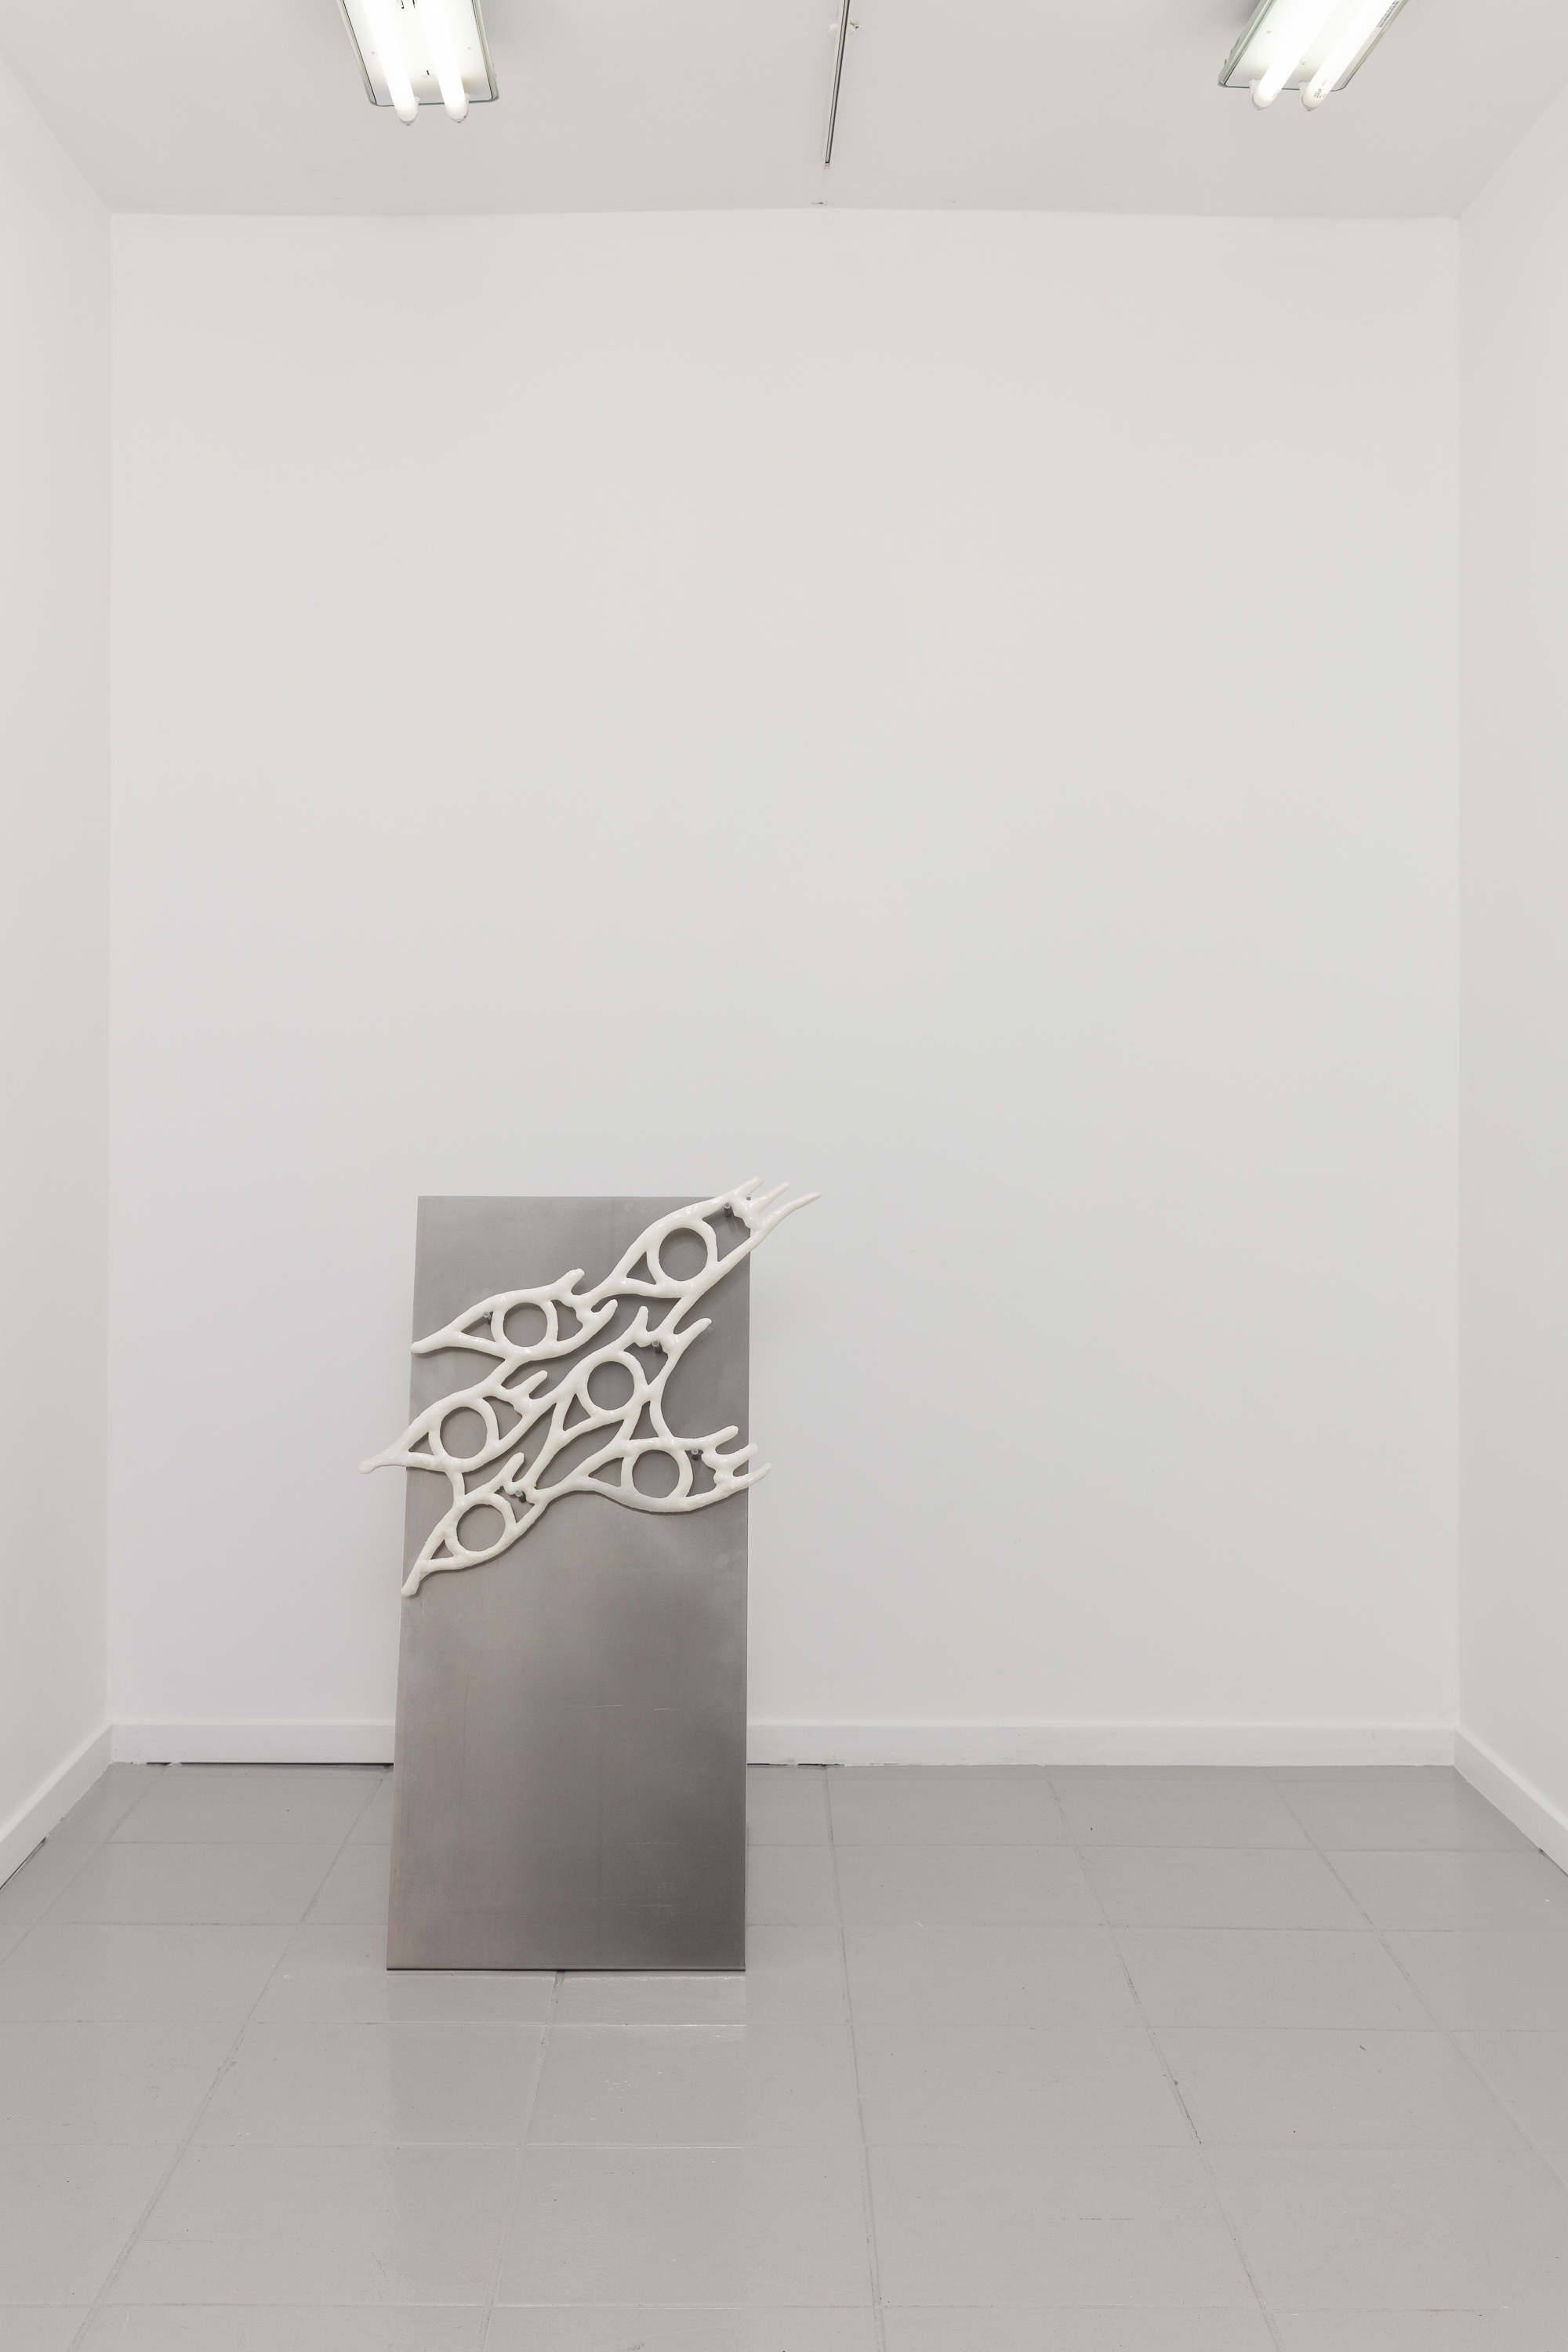 There was so much to walk away from, that still came along, installation view, Julia K. Persson at QB Gallery, Oslo